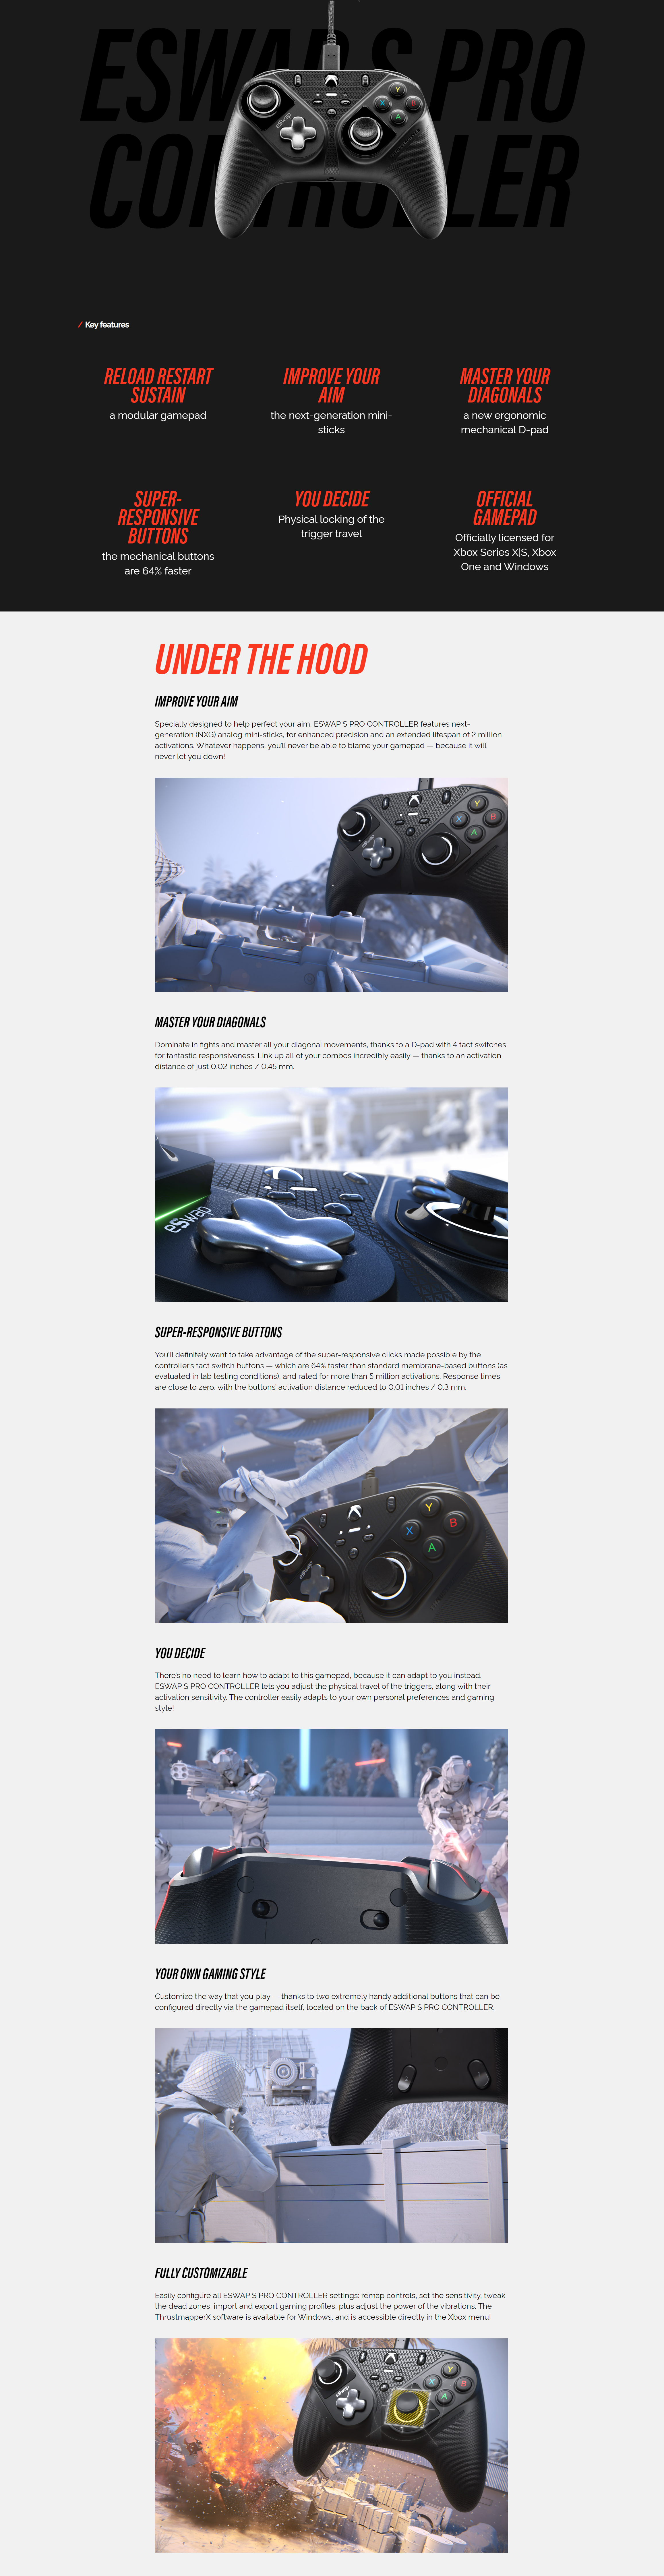 A large marketing image providing additional information about the product Thrustmaster ESWAP S Pro - Controller for PC & Xbox - Additional alt info not provided